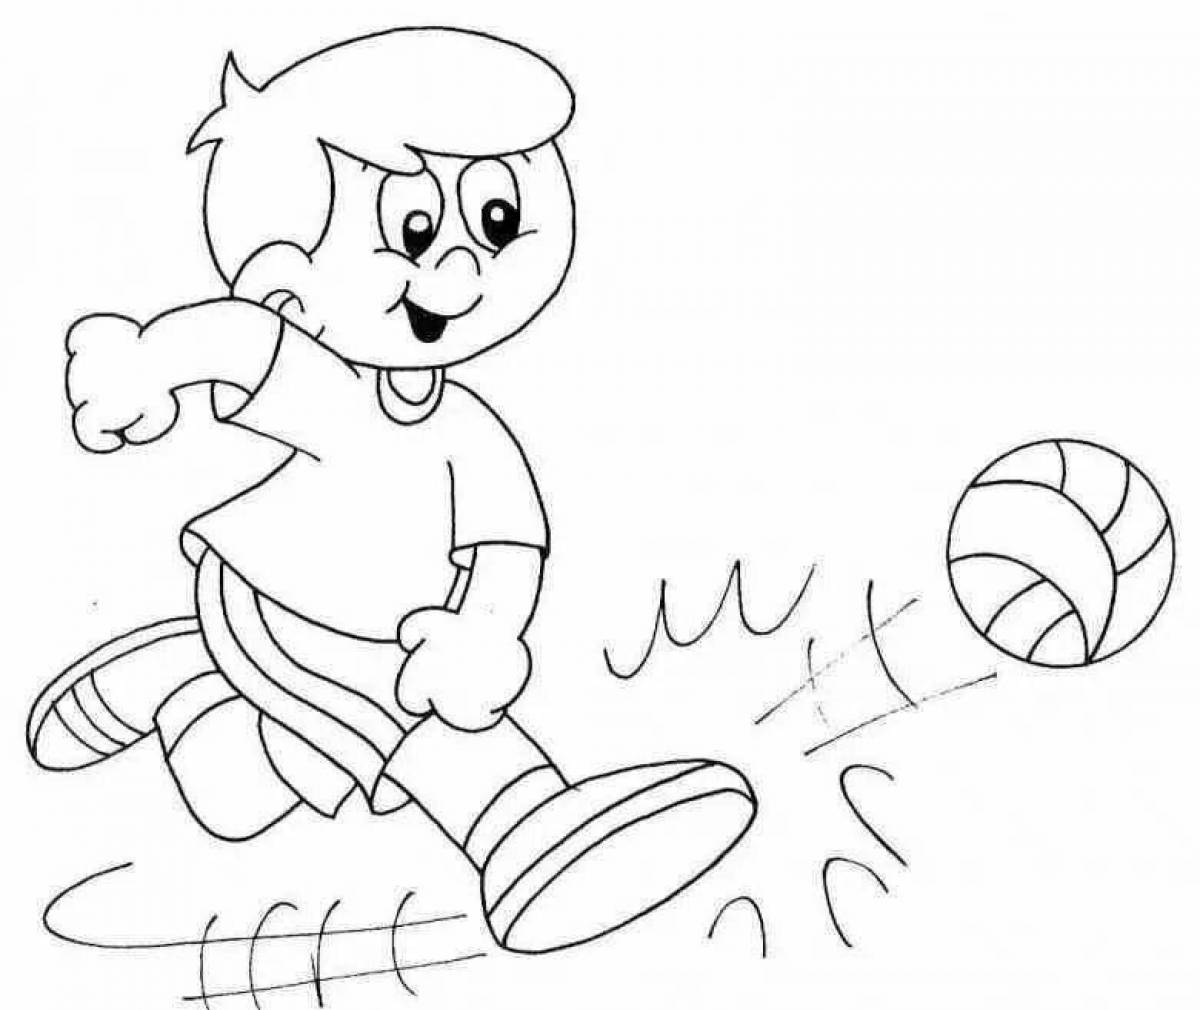 Incredible sports coloring book for kids